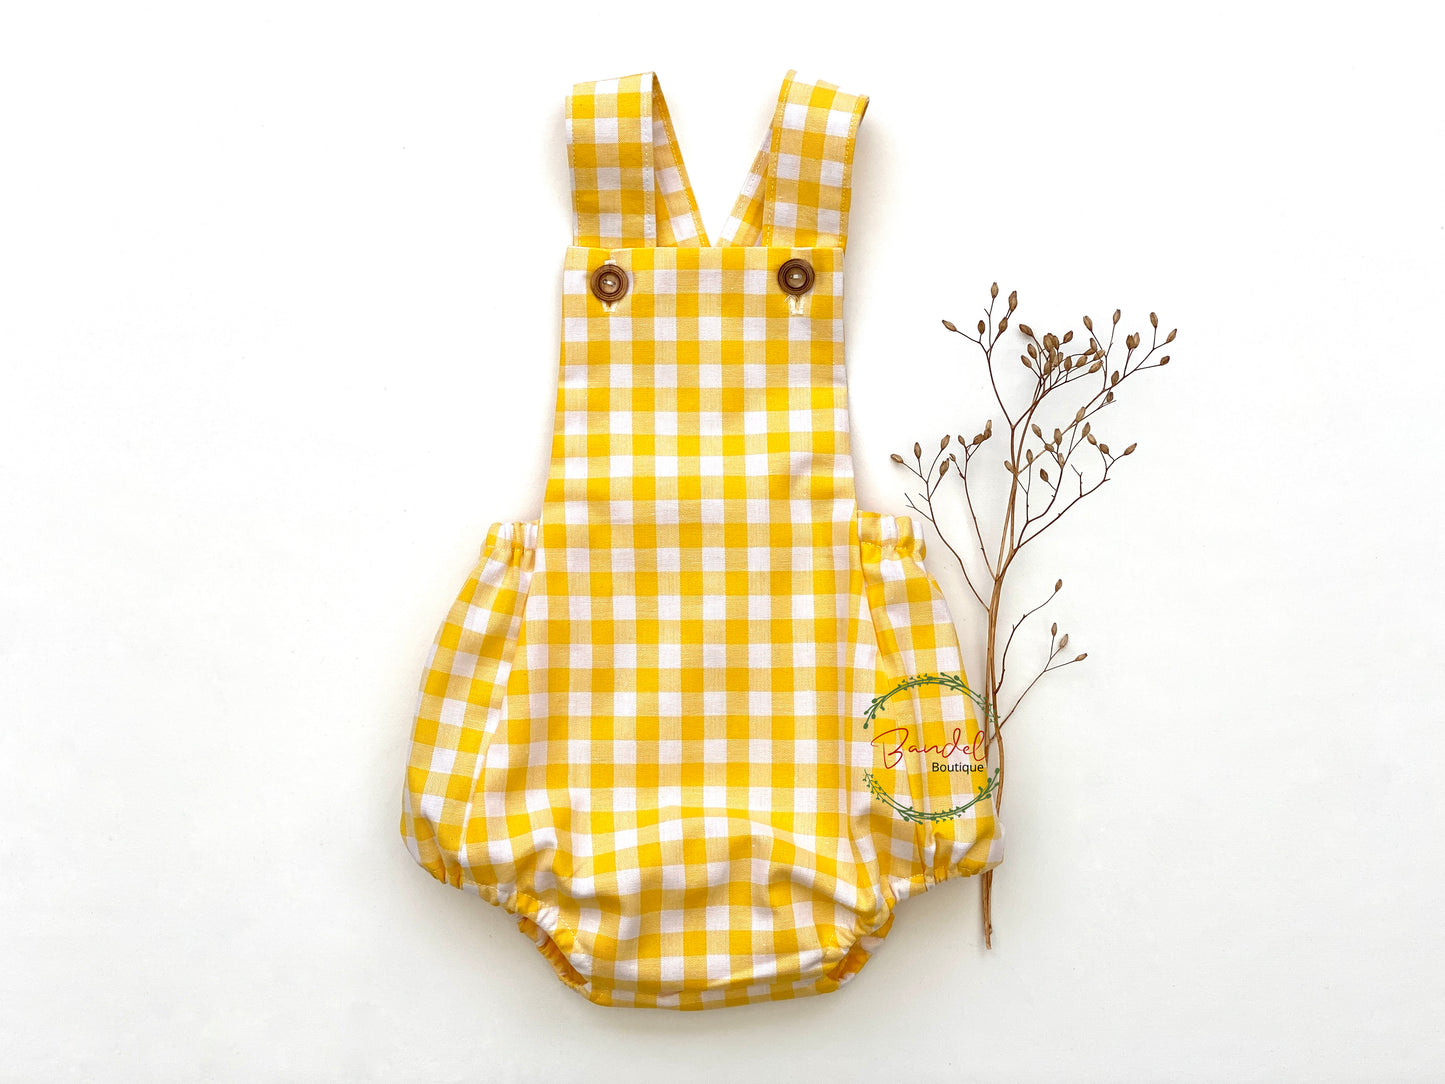 Yellow Check Cotton Romper is perfect for your little ones! Crafted from soft cotton, it is both comfortable and durable. The two shoulder straps with front wooden button closure provide a secure fit and an adorable look.